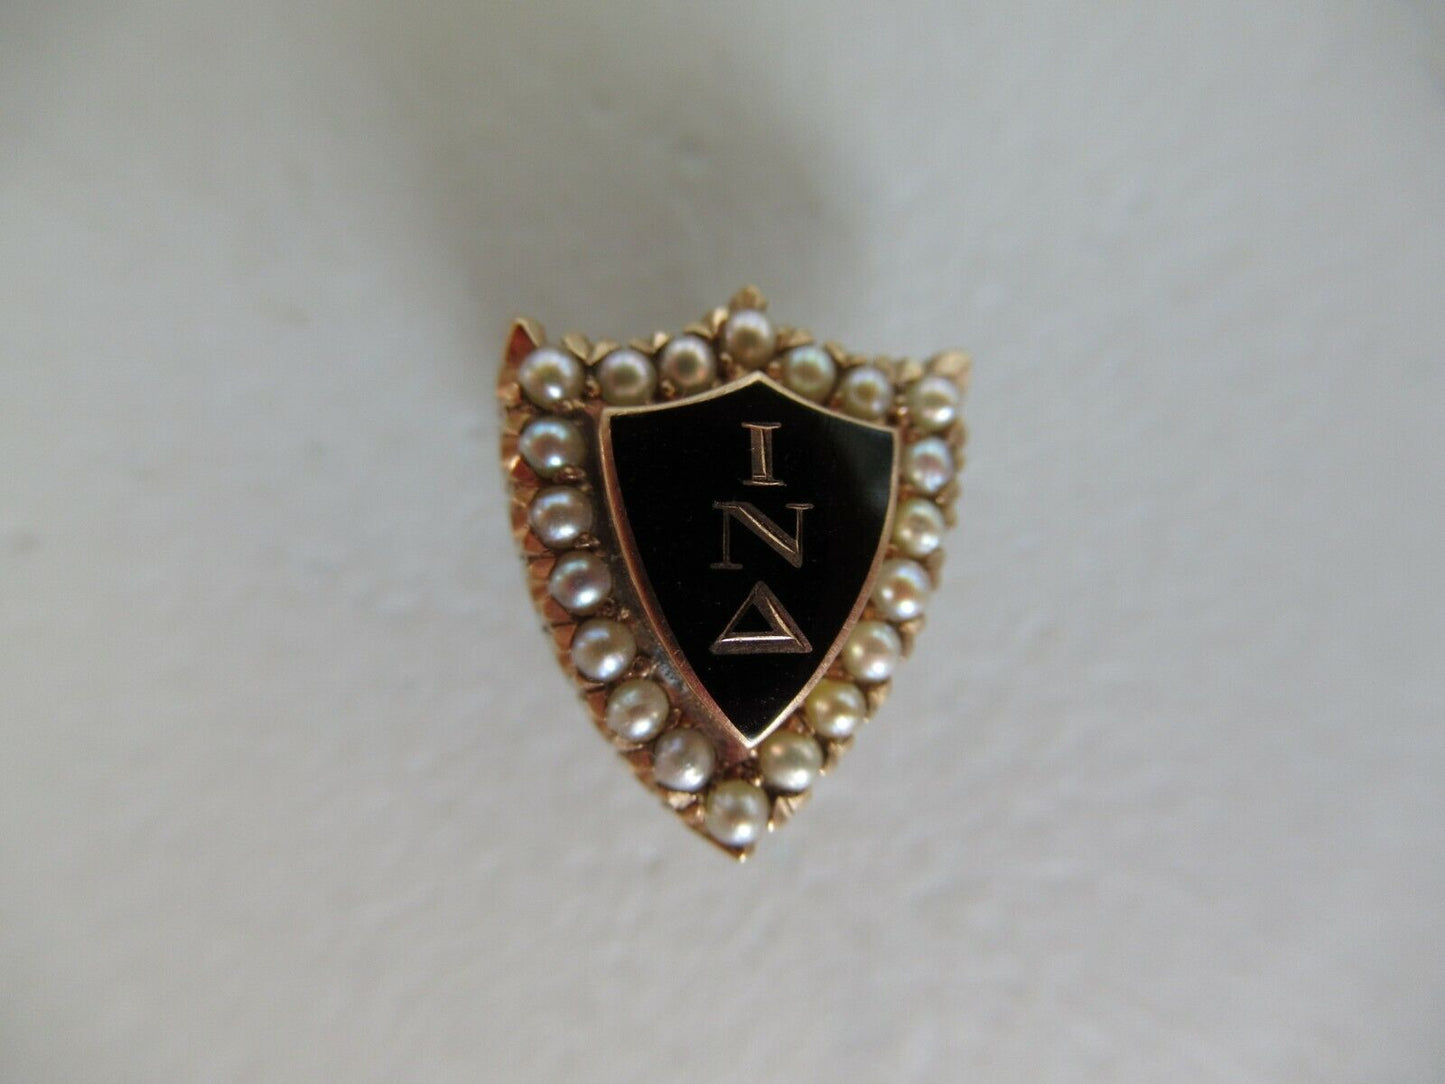 USA FRATERNITY PIN IOTA NU DELTA. MADE IN GOLD. 1954. NAMED, MARKED. 9